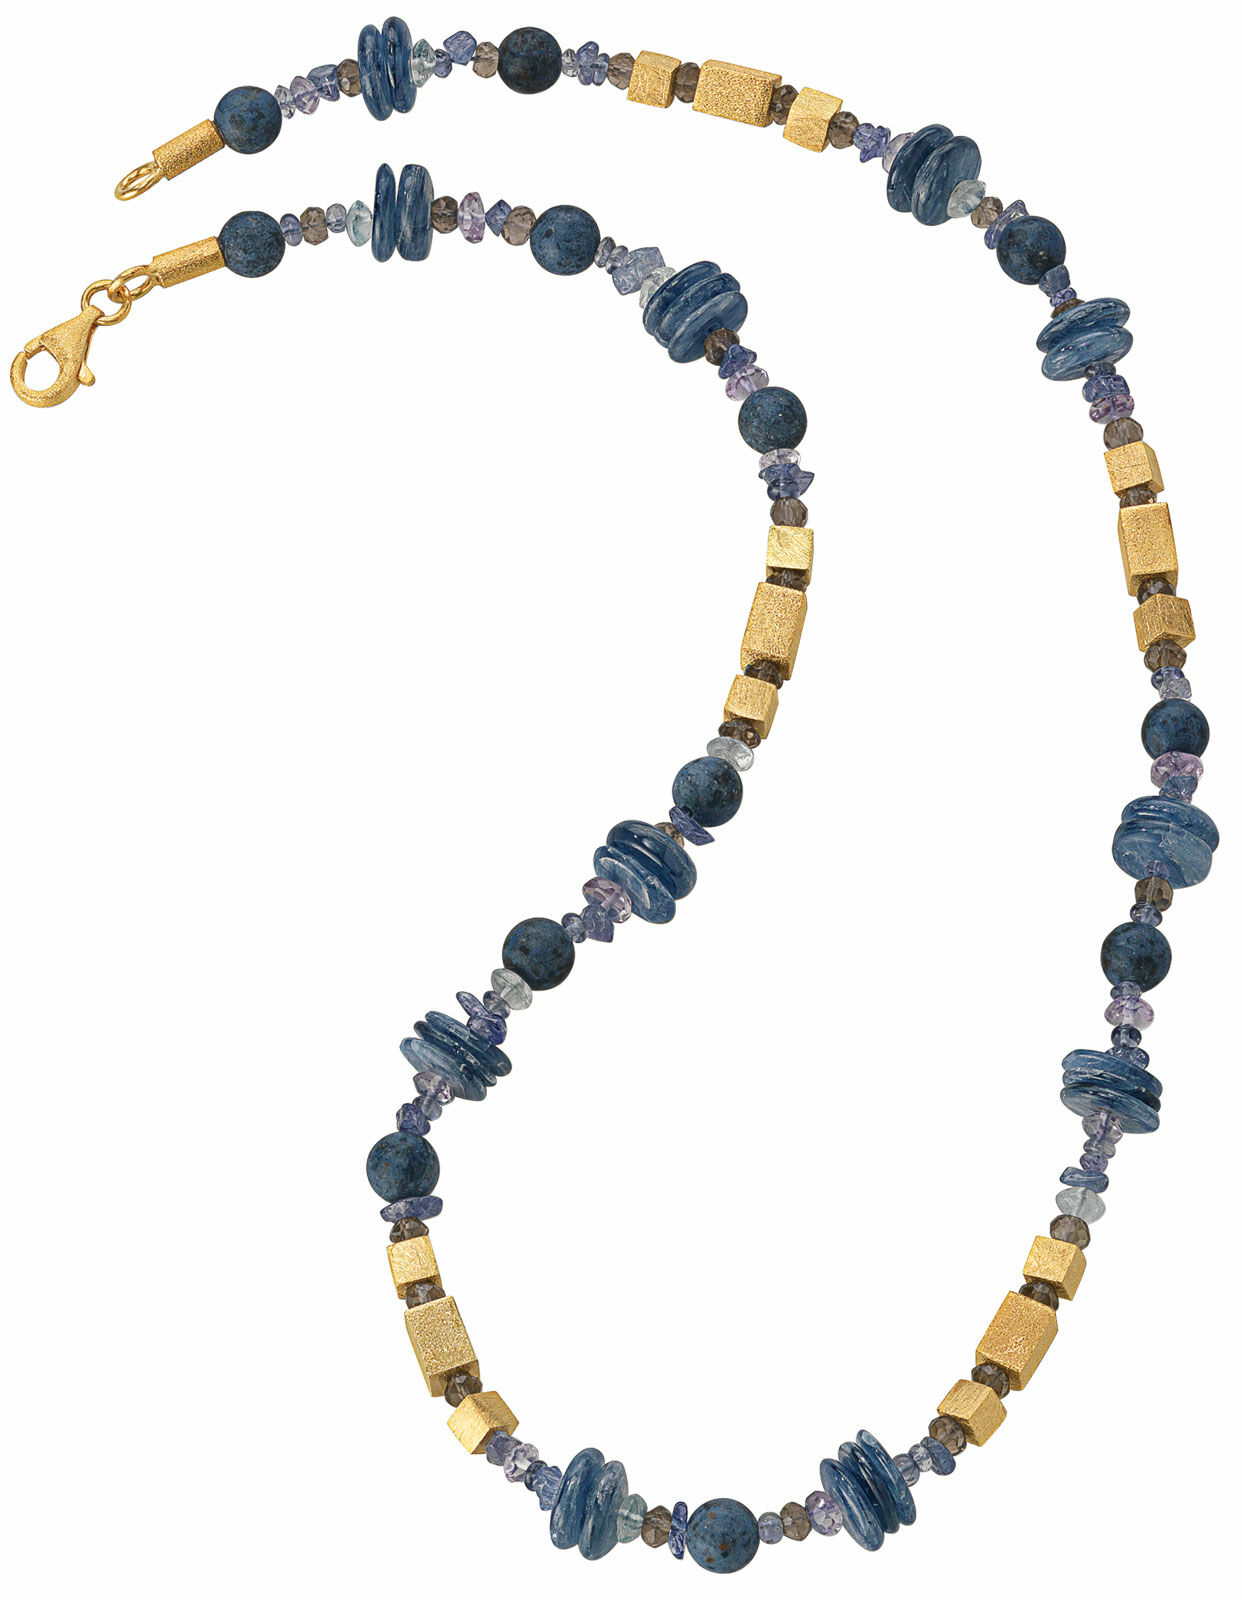 Necklace "Azul" by Ray Alba